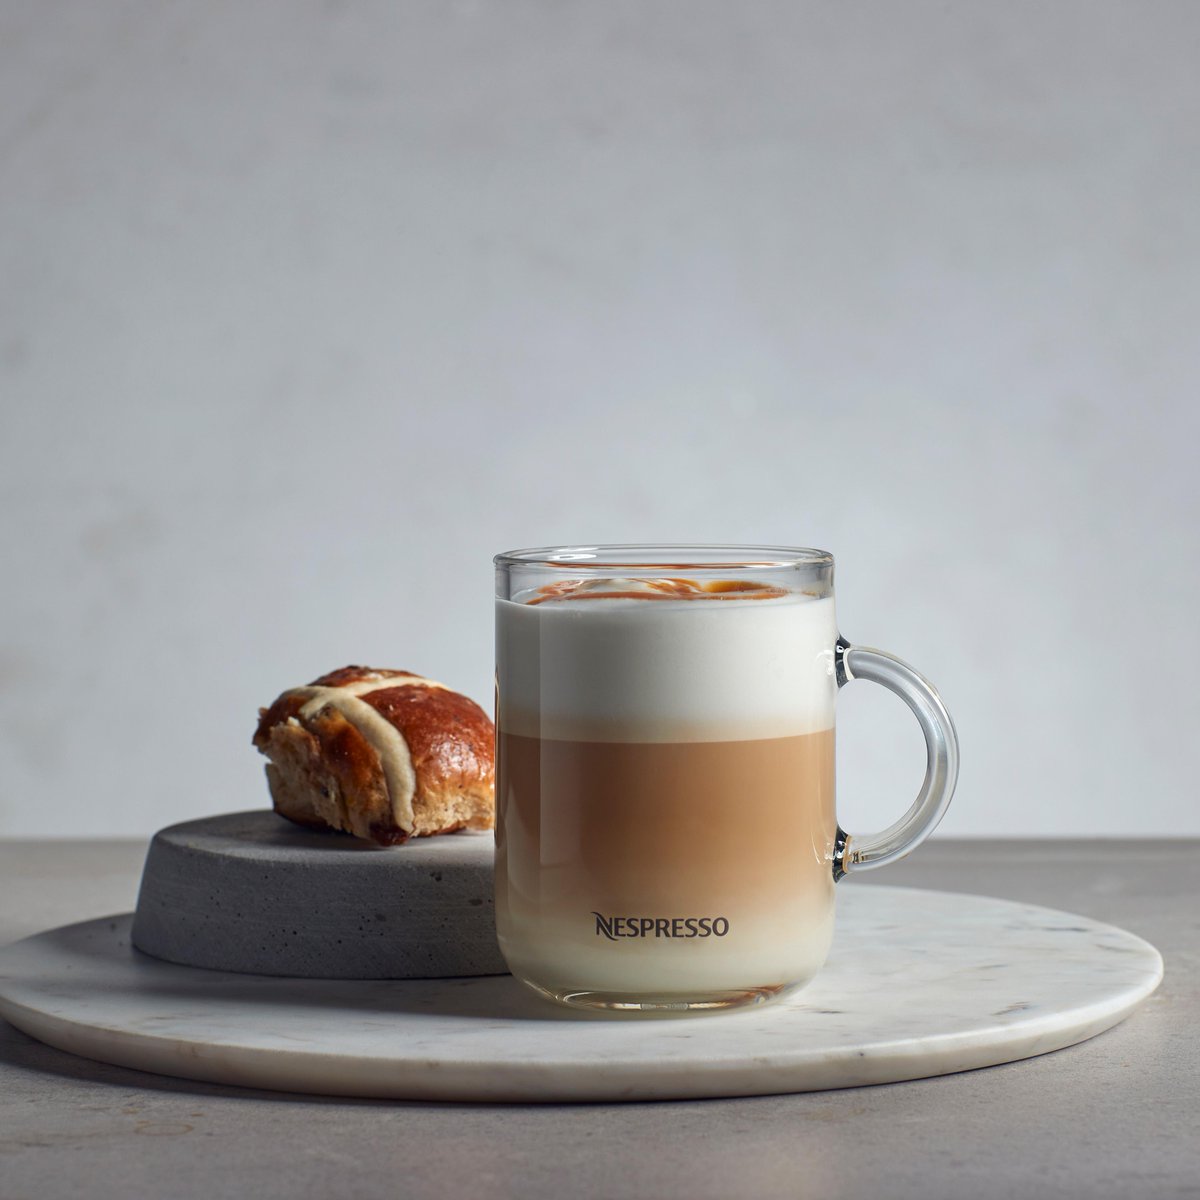 Who needs a hot cross bun when you can drink a Hot Cross Bun Latte? ☕ Hop on over to The Nespresso Bar this Bank Holiday weekend to try one! Find us at 74-75 Old Broad Street, open all weekend excluding Sunday.